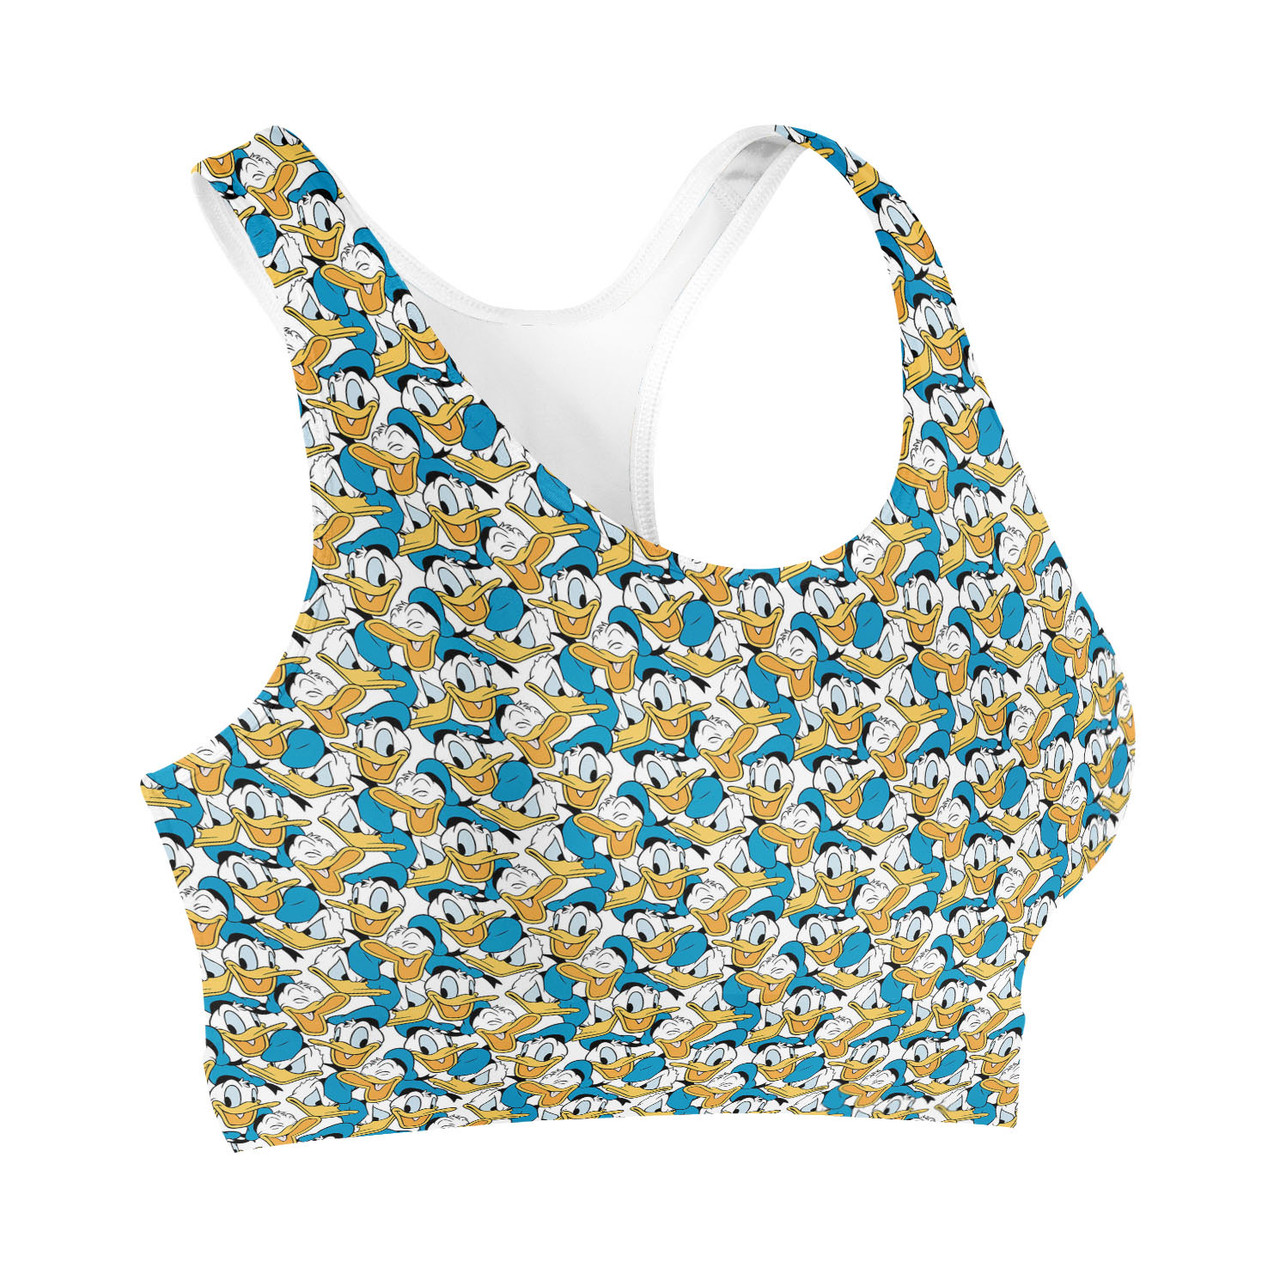 Sports Bra - Many Faces of Donald Duck - Rainbow Rules